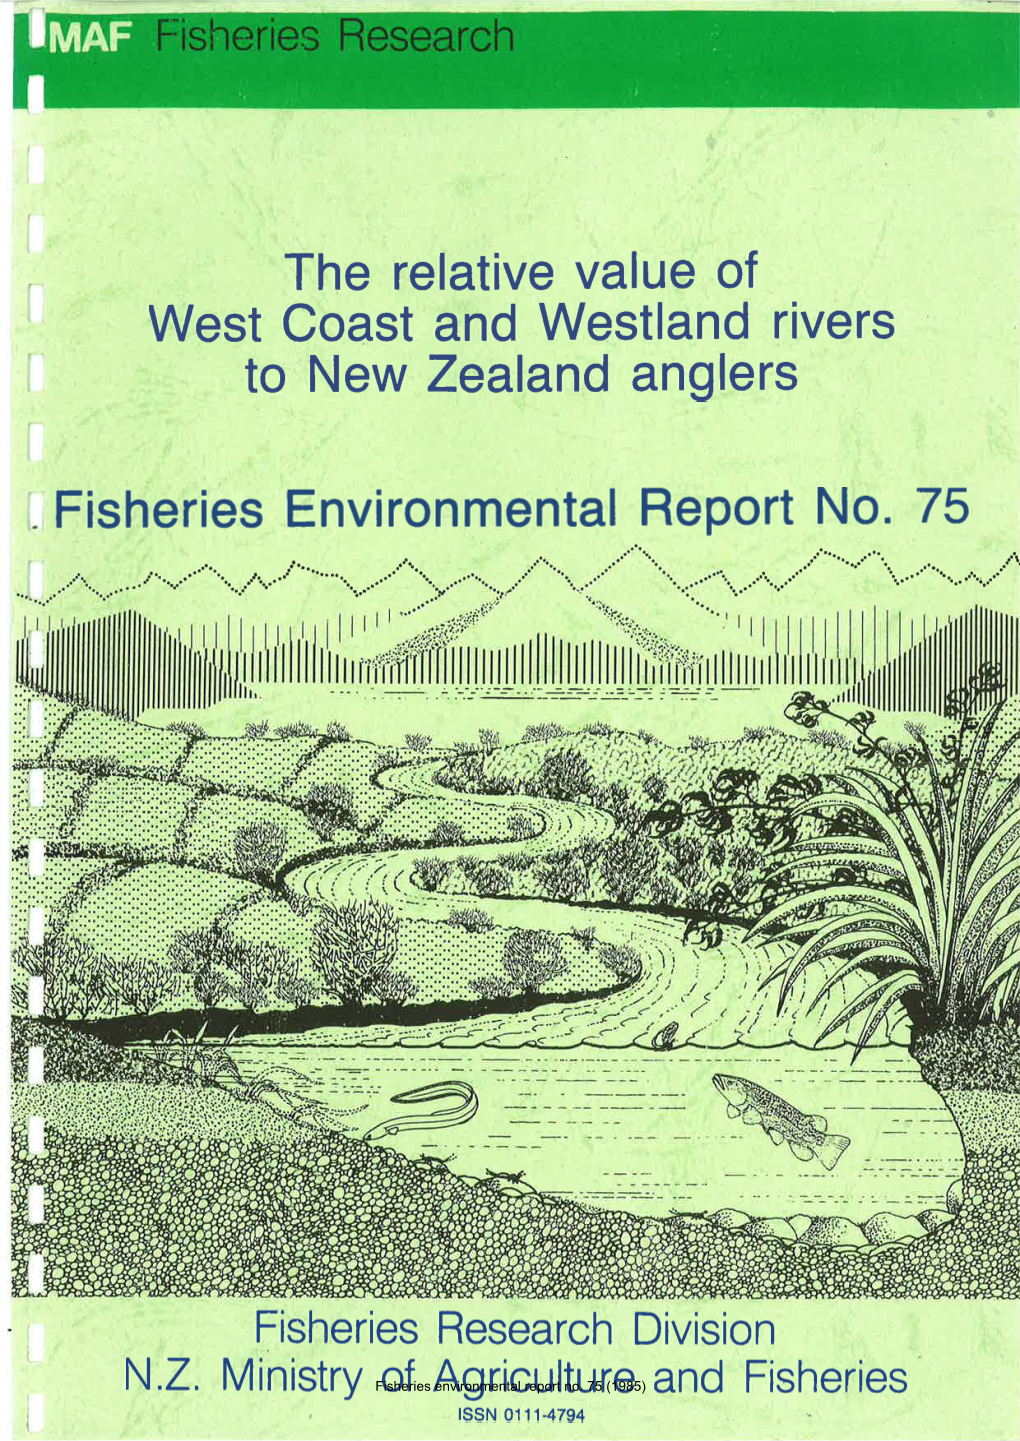 The Relative Value of West Coast and Westland Rivers to New Zealand Anglers